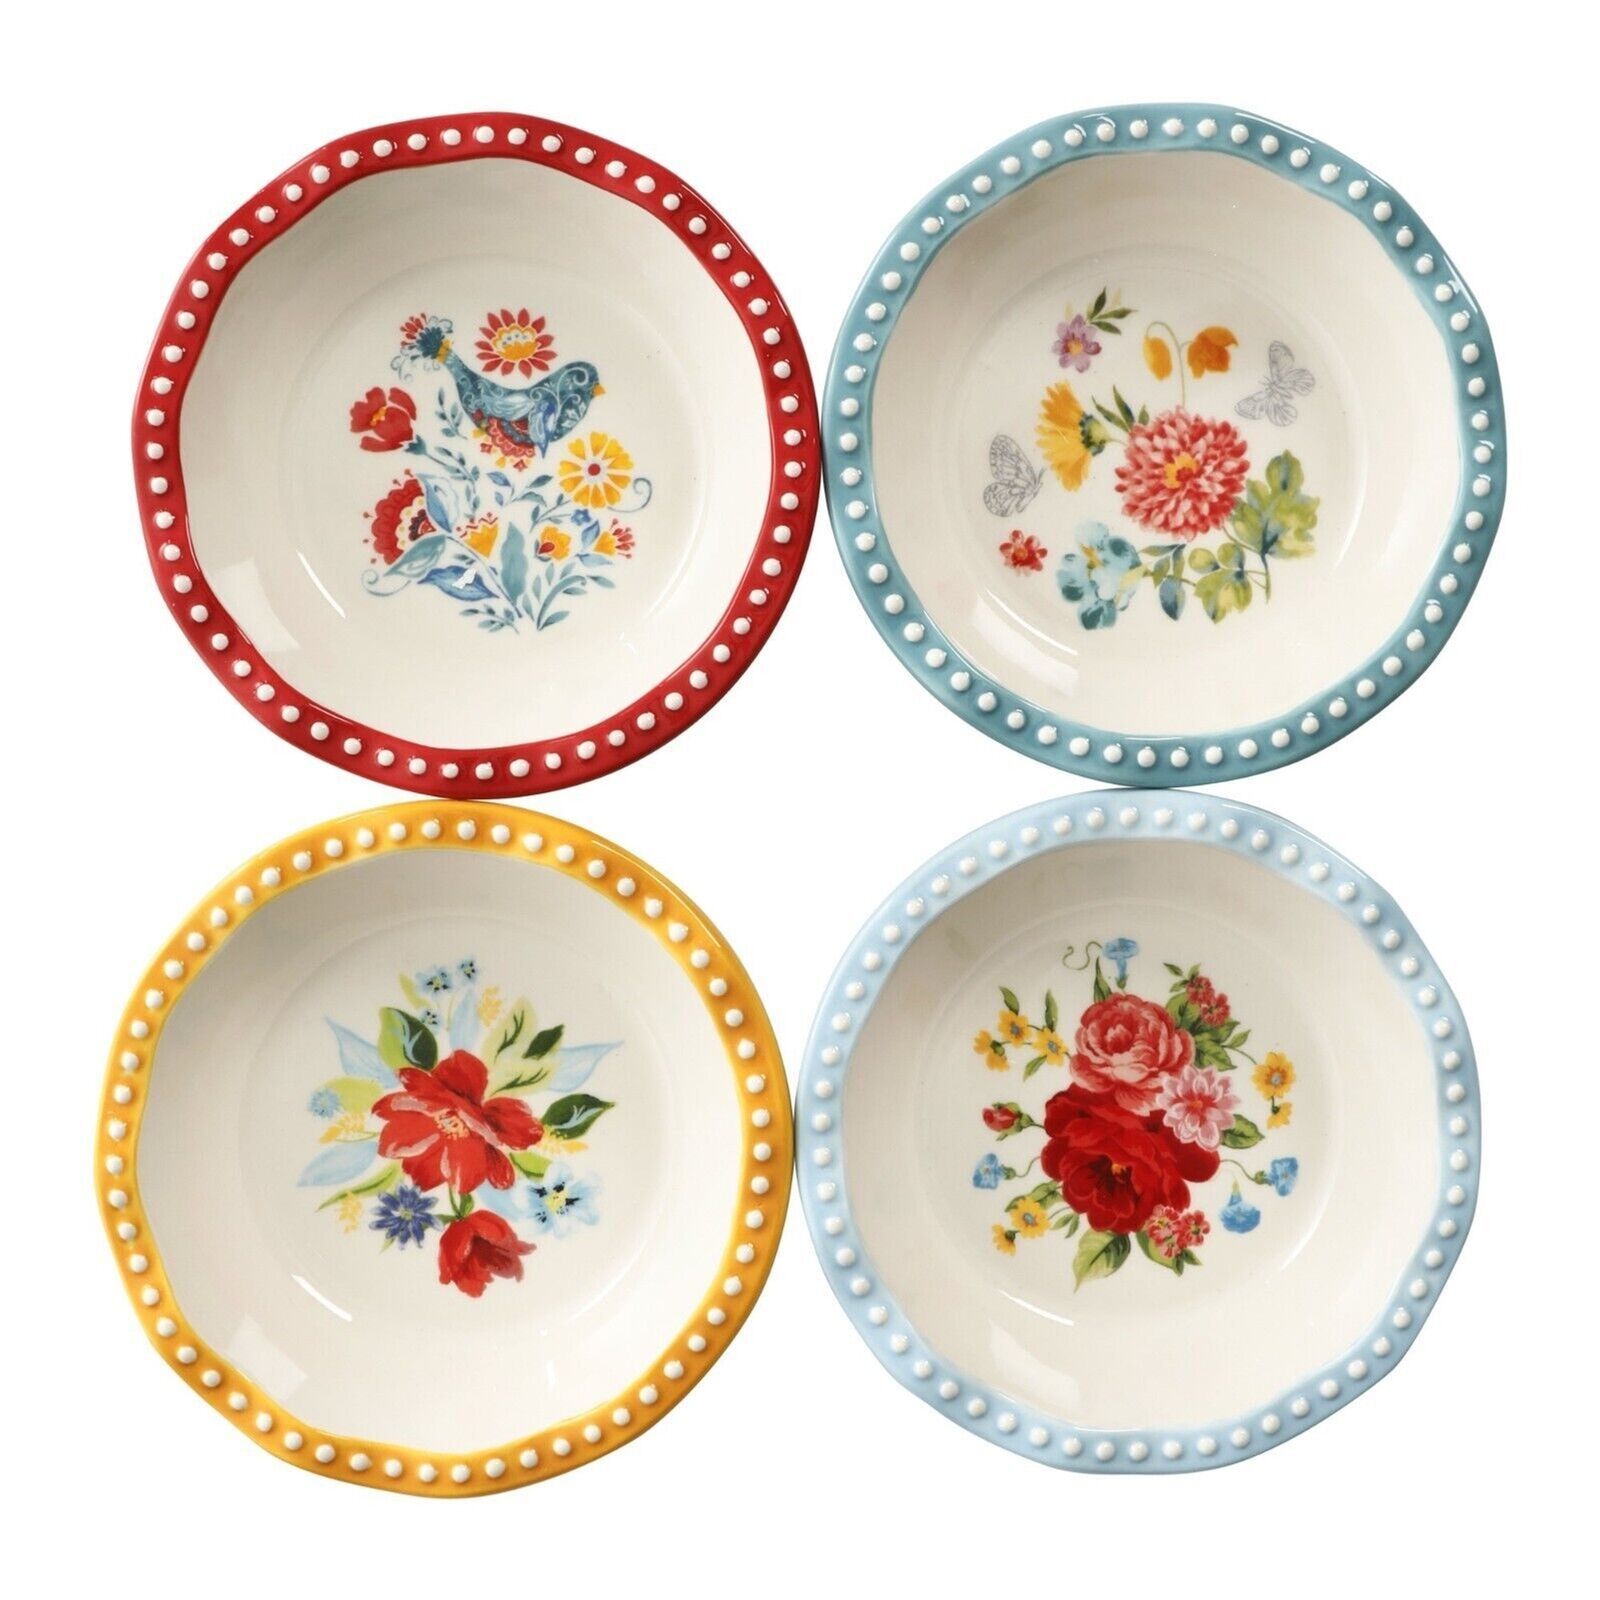 Pioneer Woman Floral Medley Mini Pie Pans Set 4-Piece Vintage Country 5.5-inch